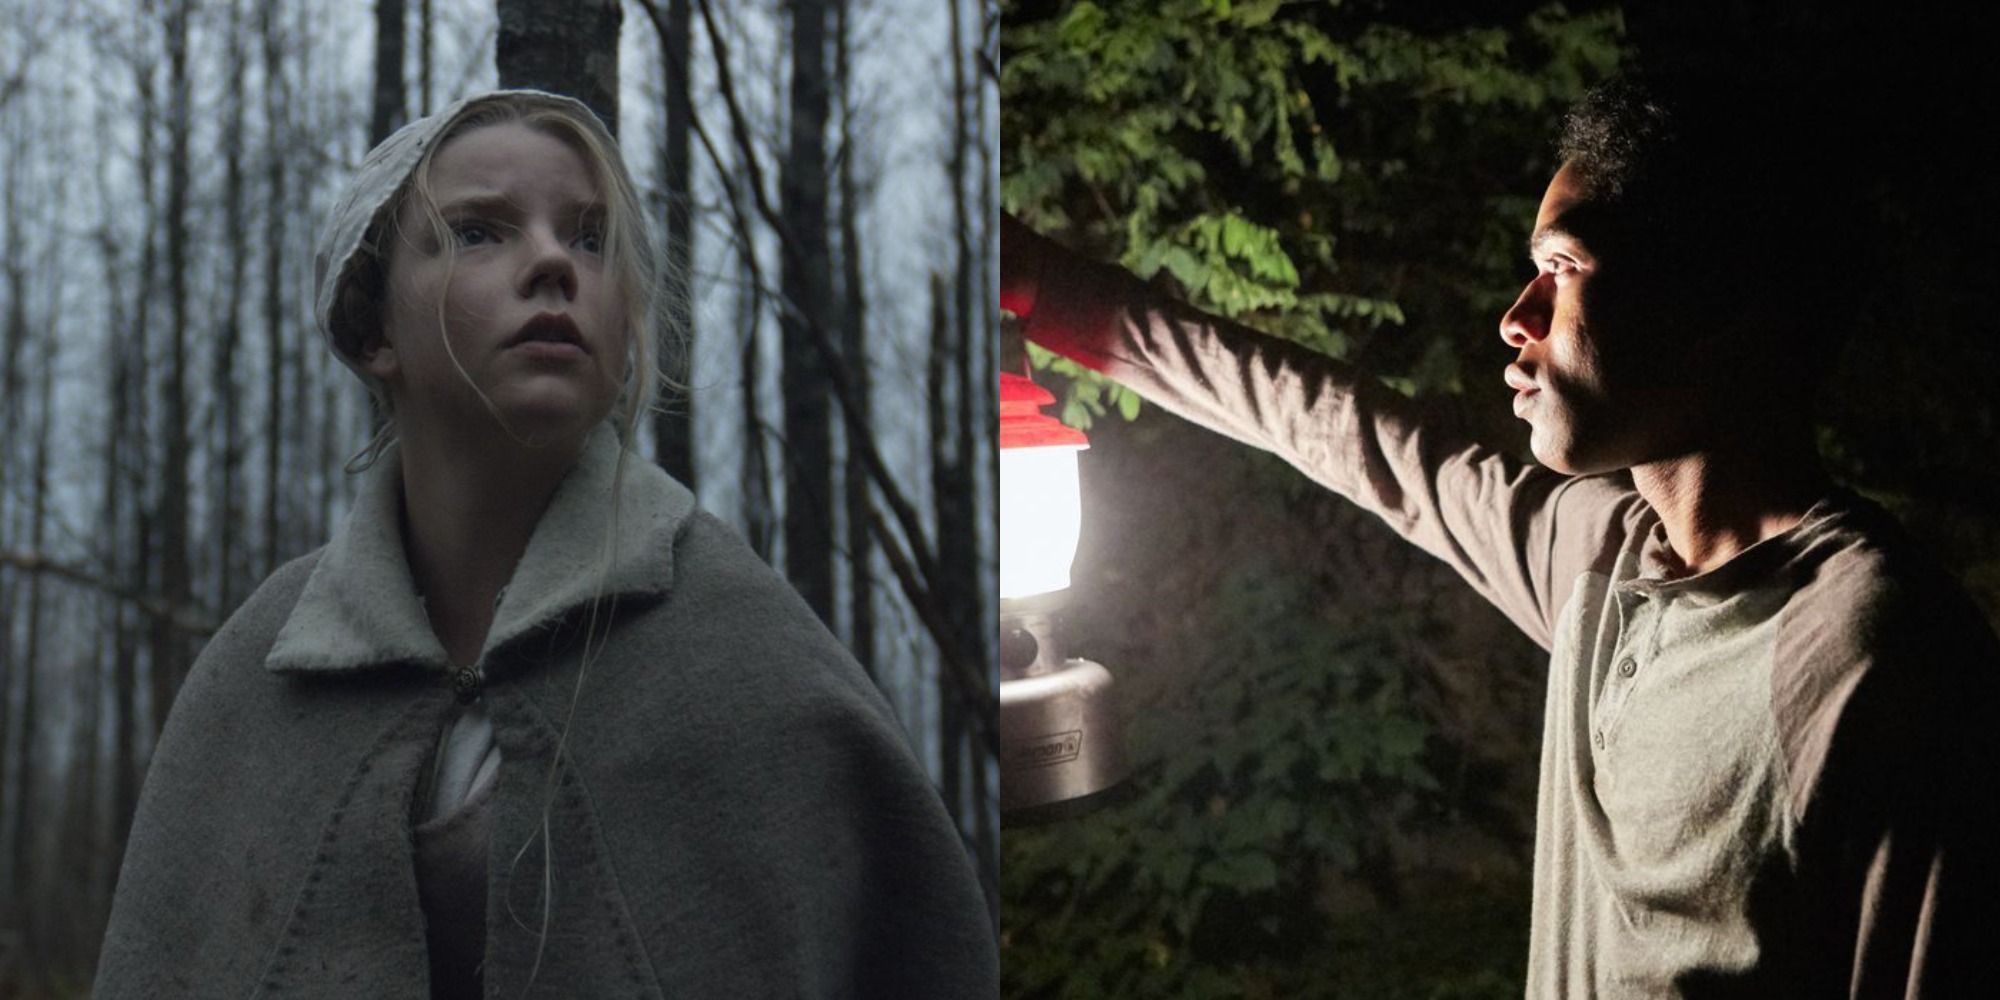 Anya Taylor Joy in the woods in The Witch next to Travis holding a lantern in the woods in It Comes at Night